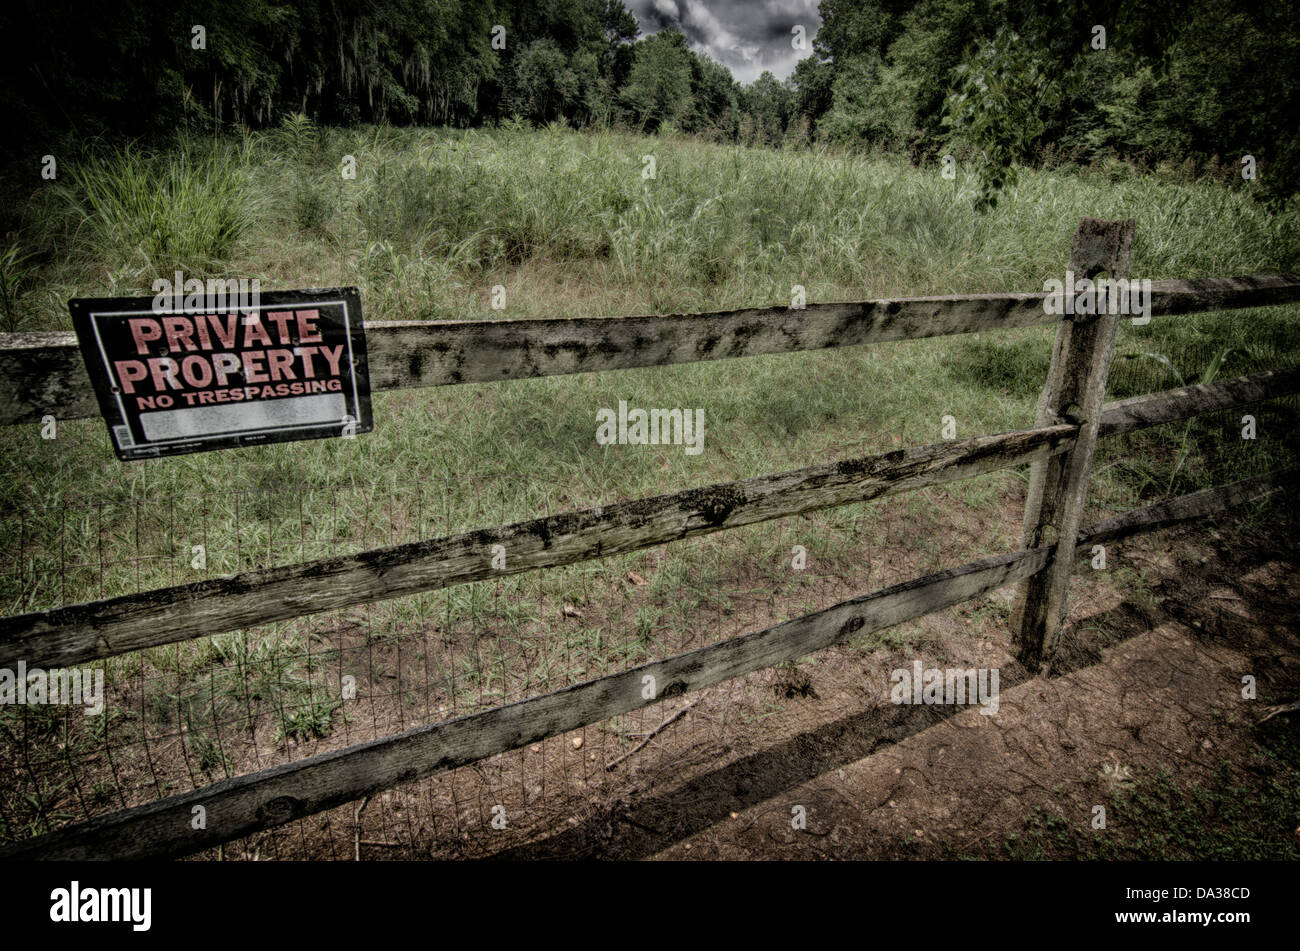 This is a grungy image of a private property sign on a wooden fence in a rural area. Stock Photo